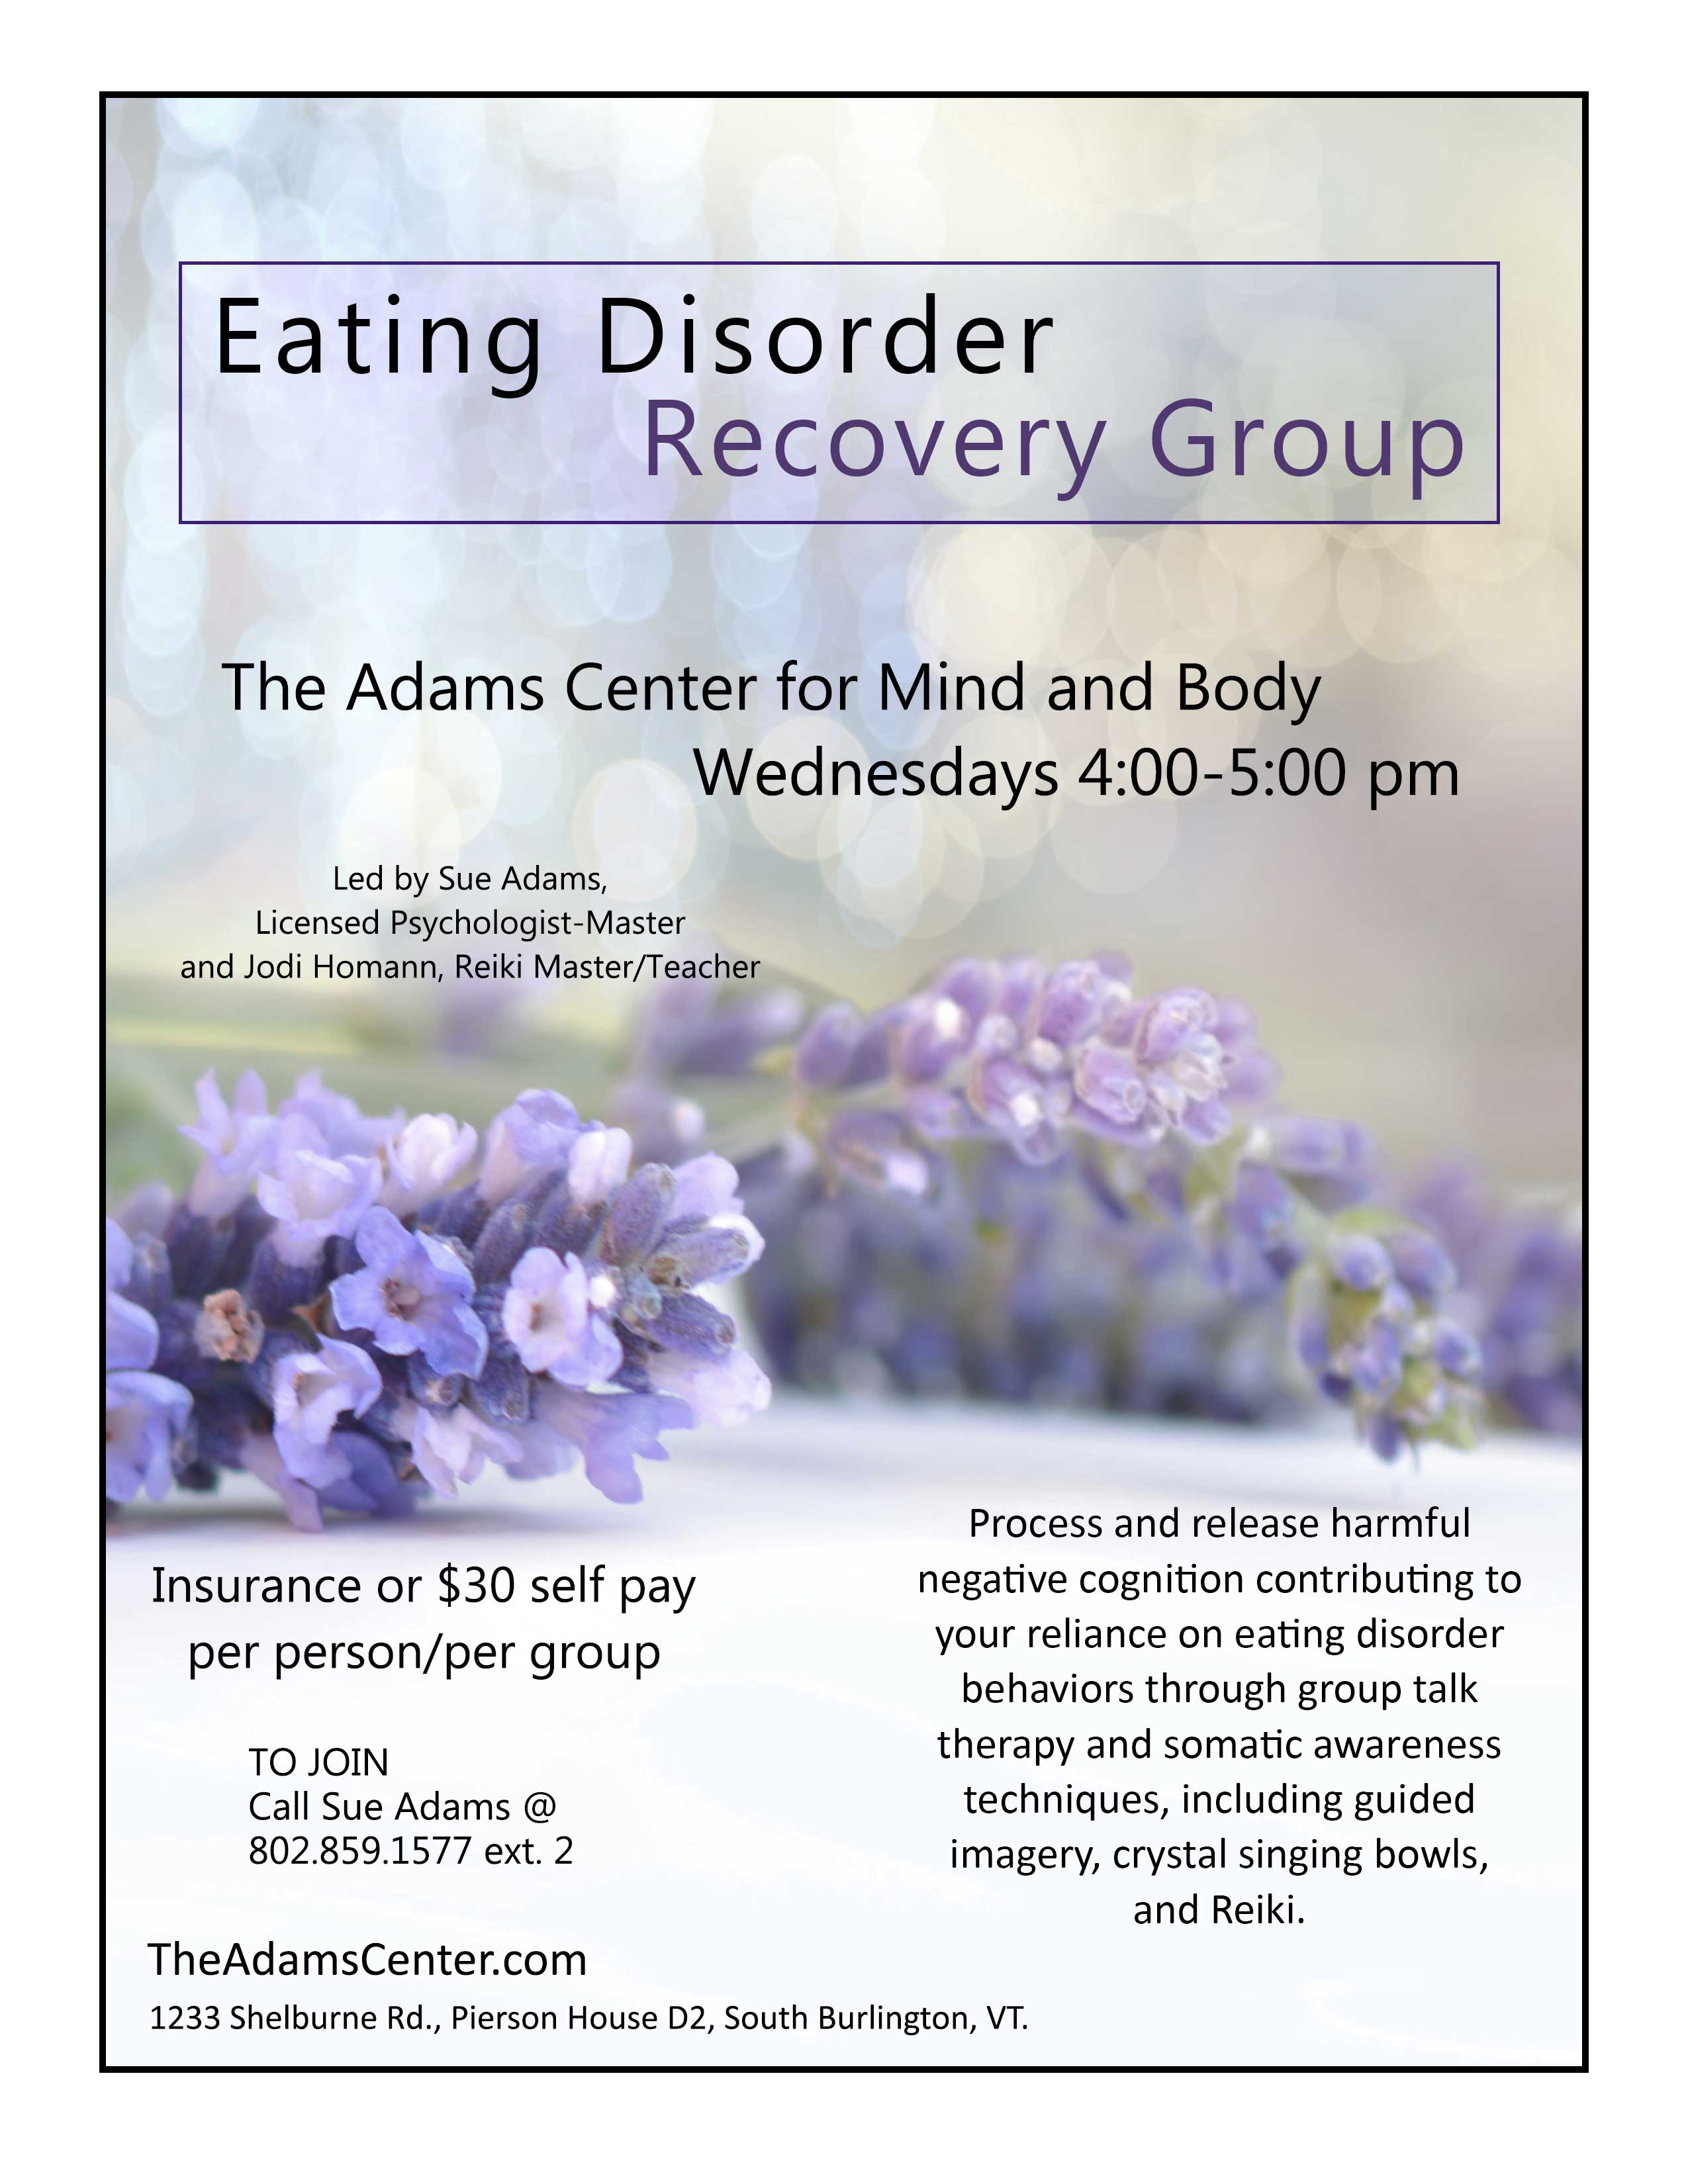 Eating Disorder Recovery Group Flyer